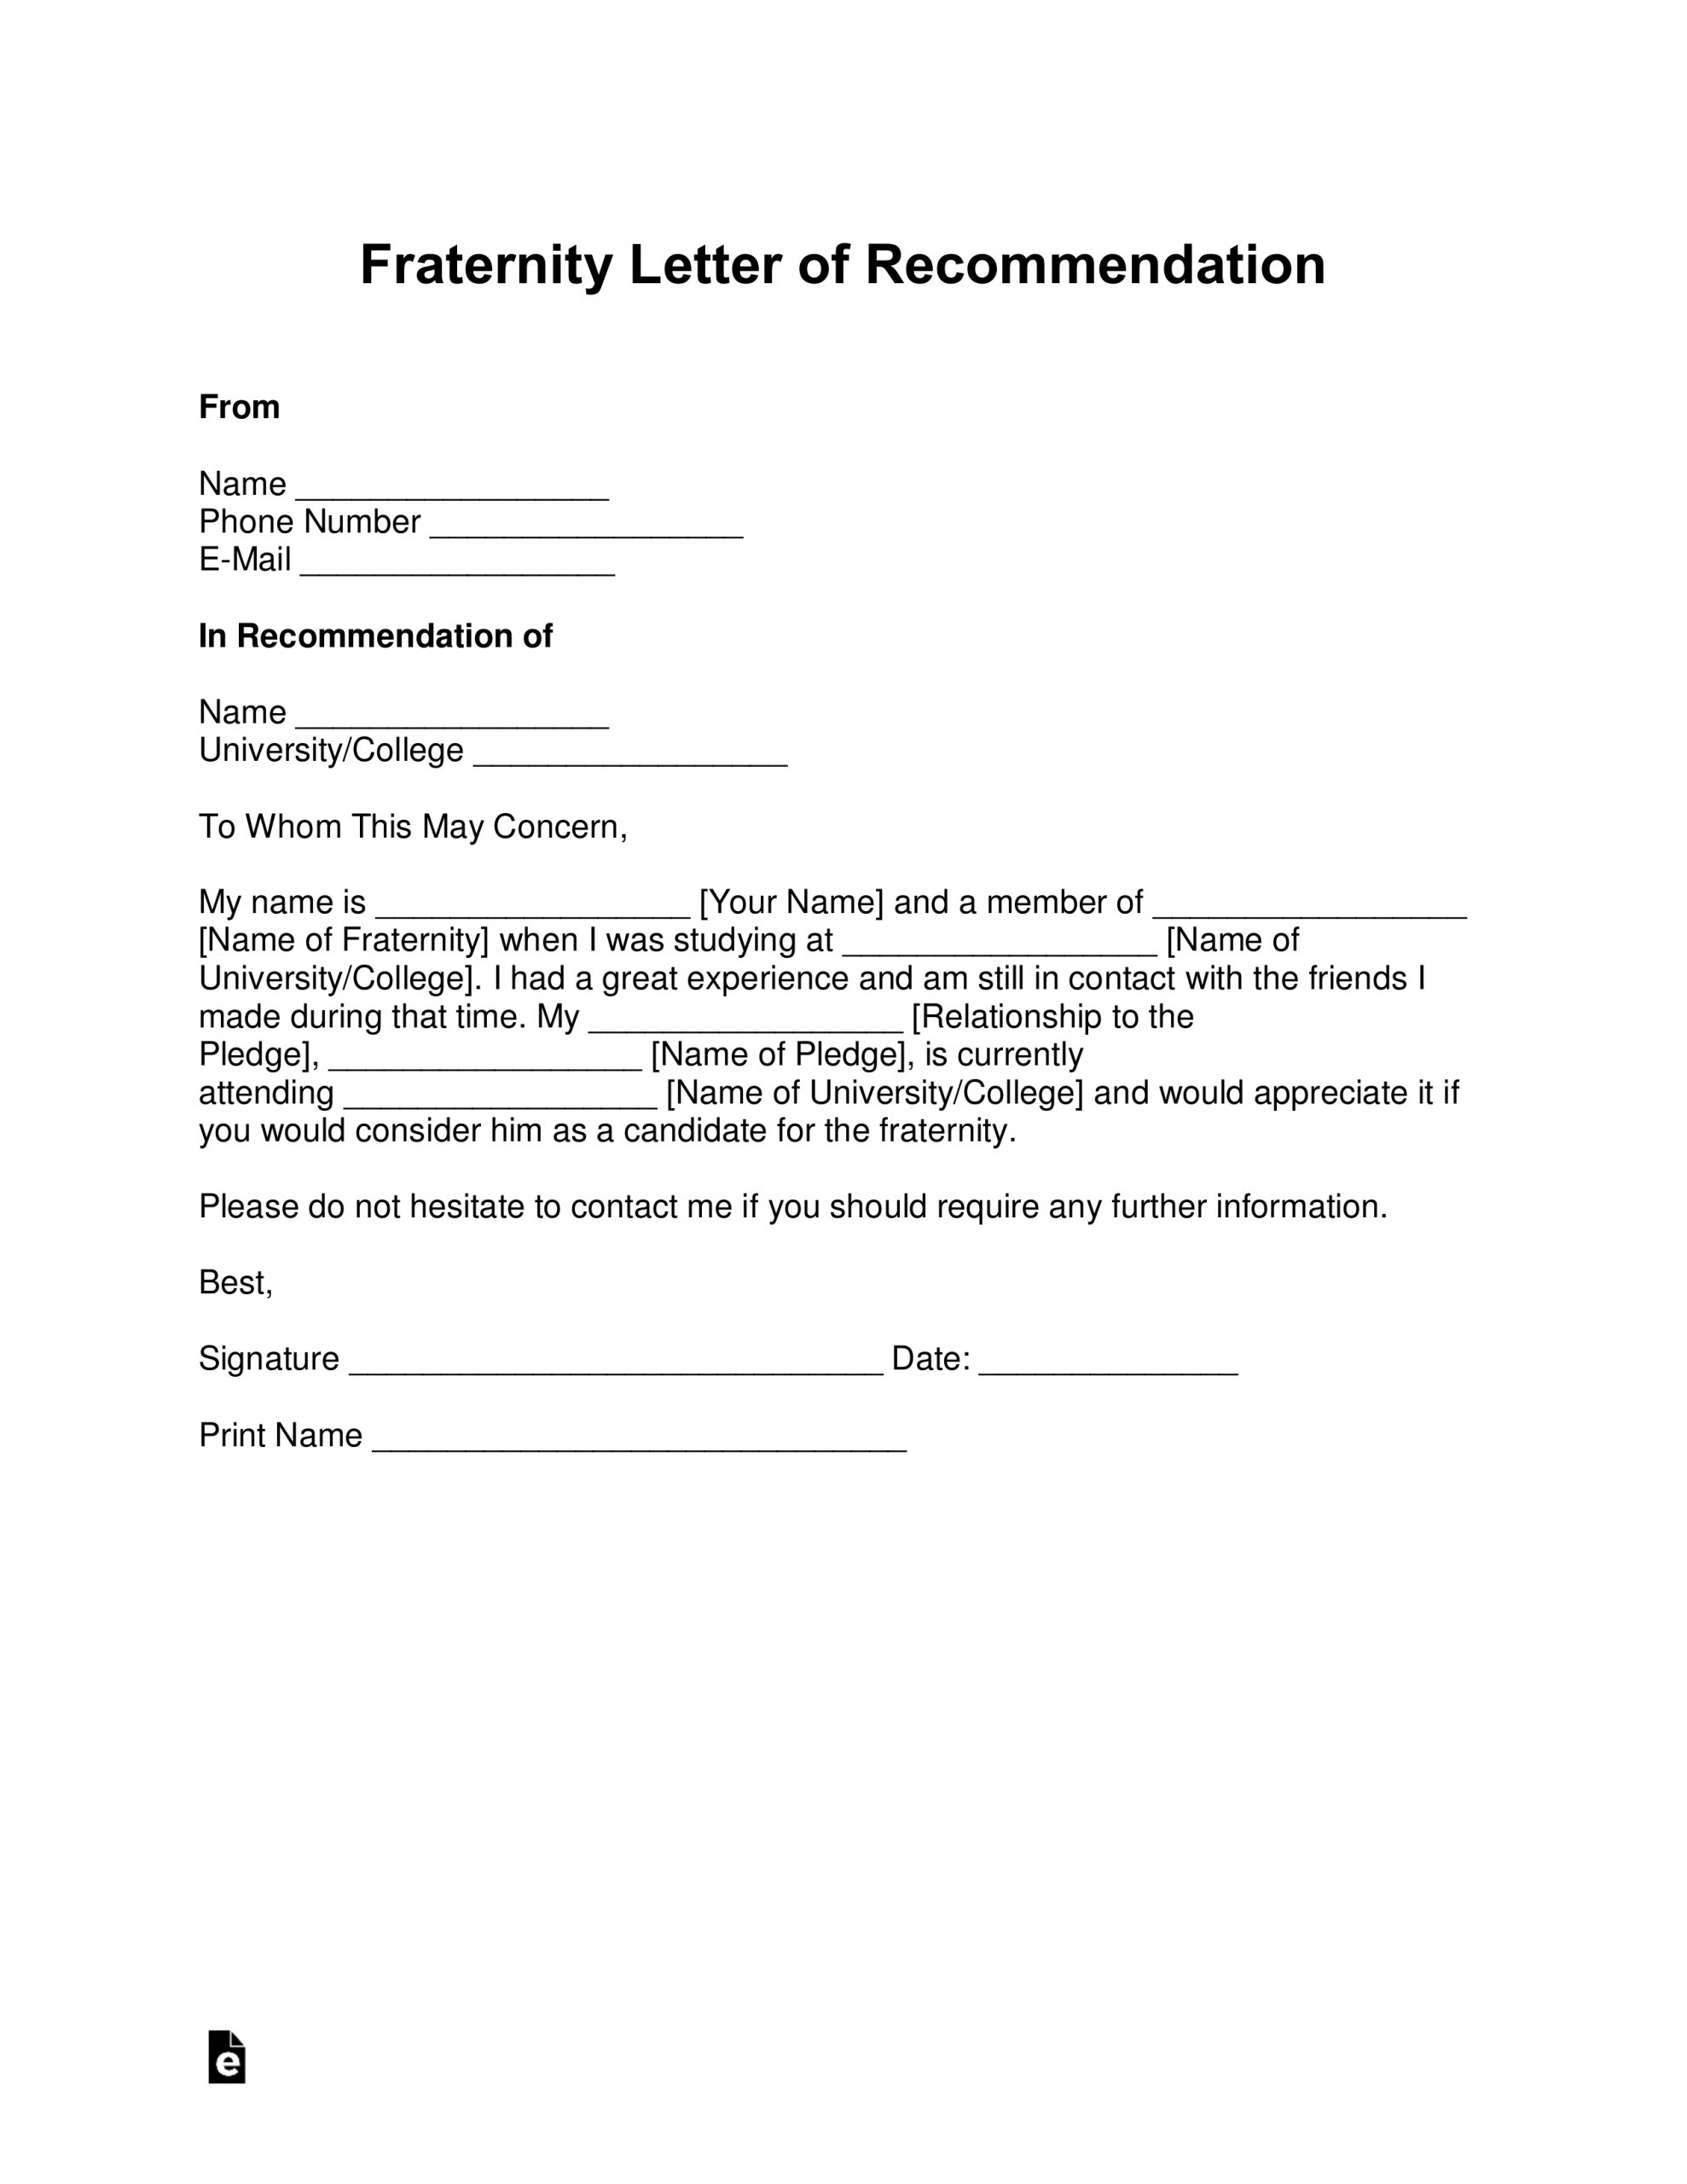 Free Fraternity Letter Of Recommendation Template With inside size 2550 X 3301